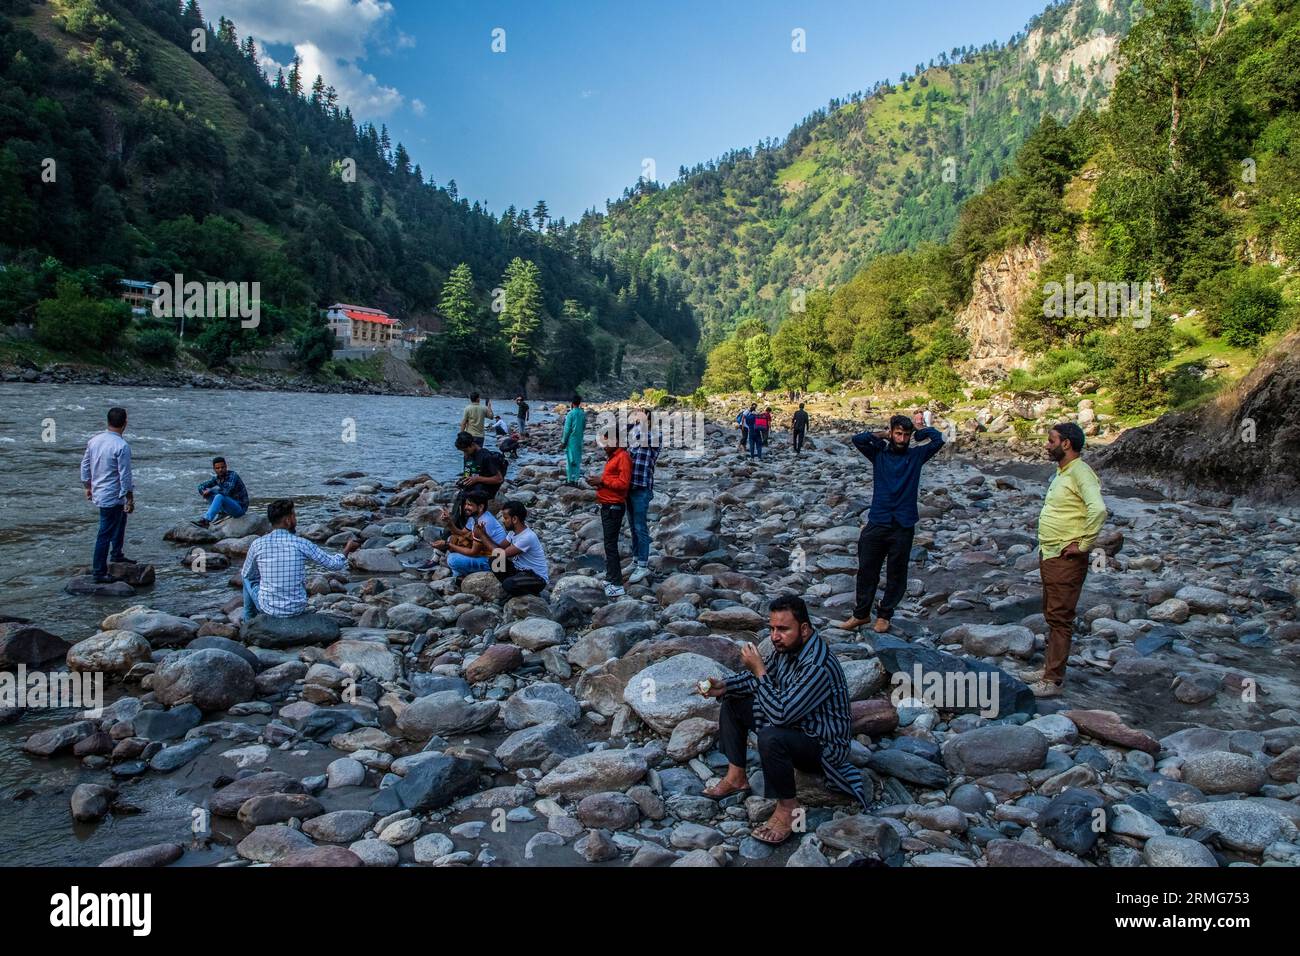 Keran Kupwara, India. 24th Aug, 2023. People are seen relaxing on the banks of Neelam river or Kishan Ganga that has divided Kashmir into two parts controlled by nuclear rivals India and Pakistan. The river acts as a disputed line of control and flows through a village called Keran from both sides which is located on the northern side of Indian Kashmir's Border district Kupwara some 150kms from Srinagar and 93kms from Muzaffarabad, in the Pakistan side of Kashmir. (Photo by Faisal Bashir/SOPA Images/Sipa USA) Credit: Sipa USA/Alamy Live News Stock Photo